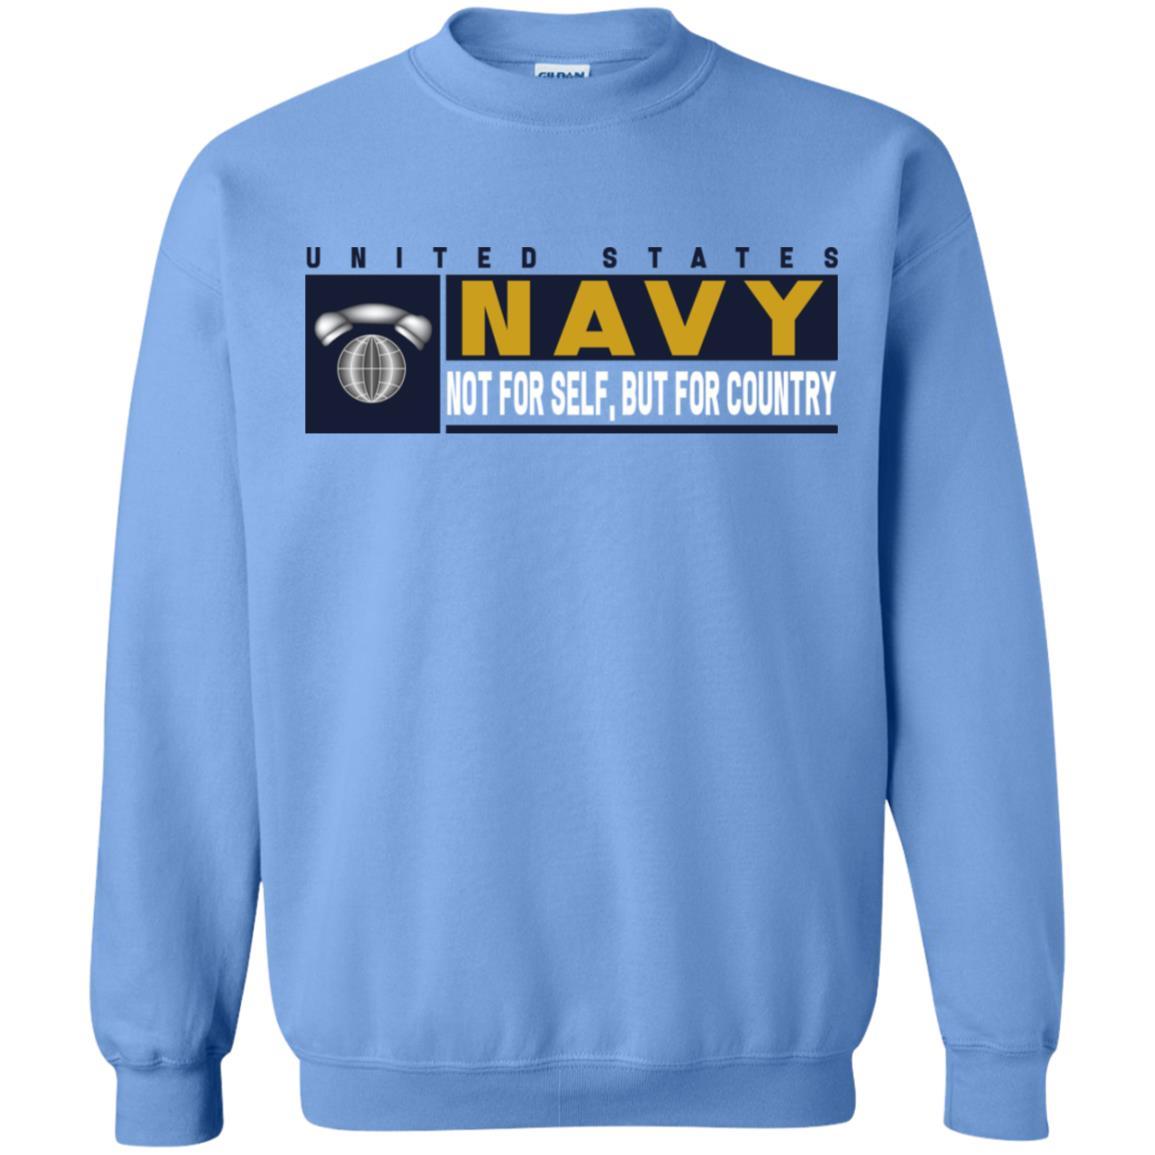 Navy Interior Communications Electrician Navy IC- Not for self Long Sleeve - Pullover Hoodie-TShirt-Navy-Veterans Nation